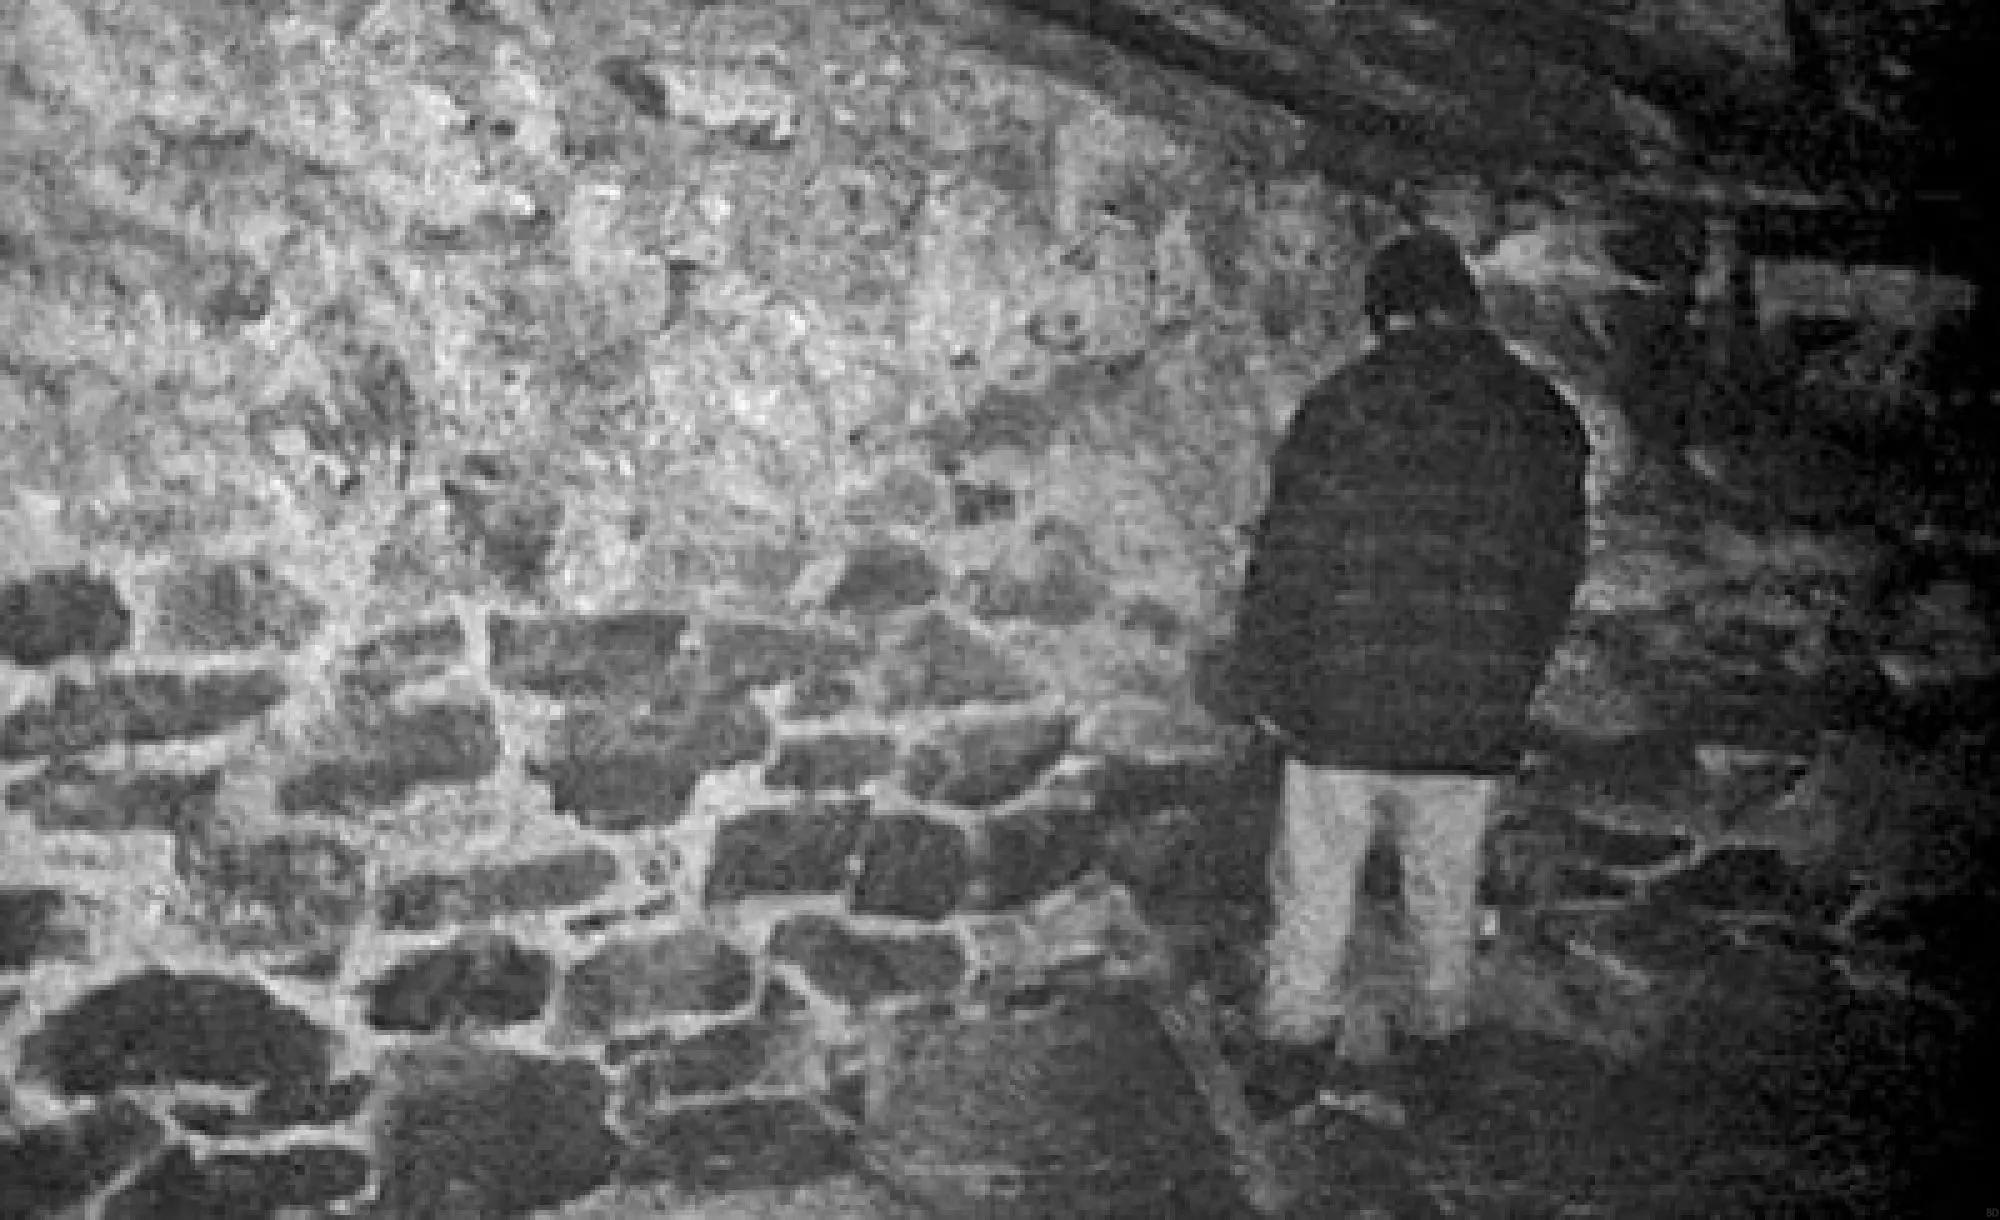 The Blair Witch Project sees the student filmmakers suffer (